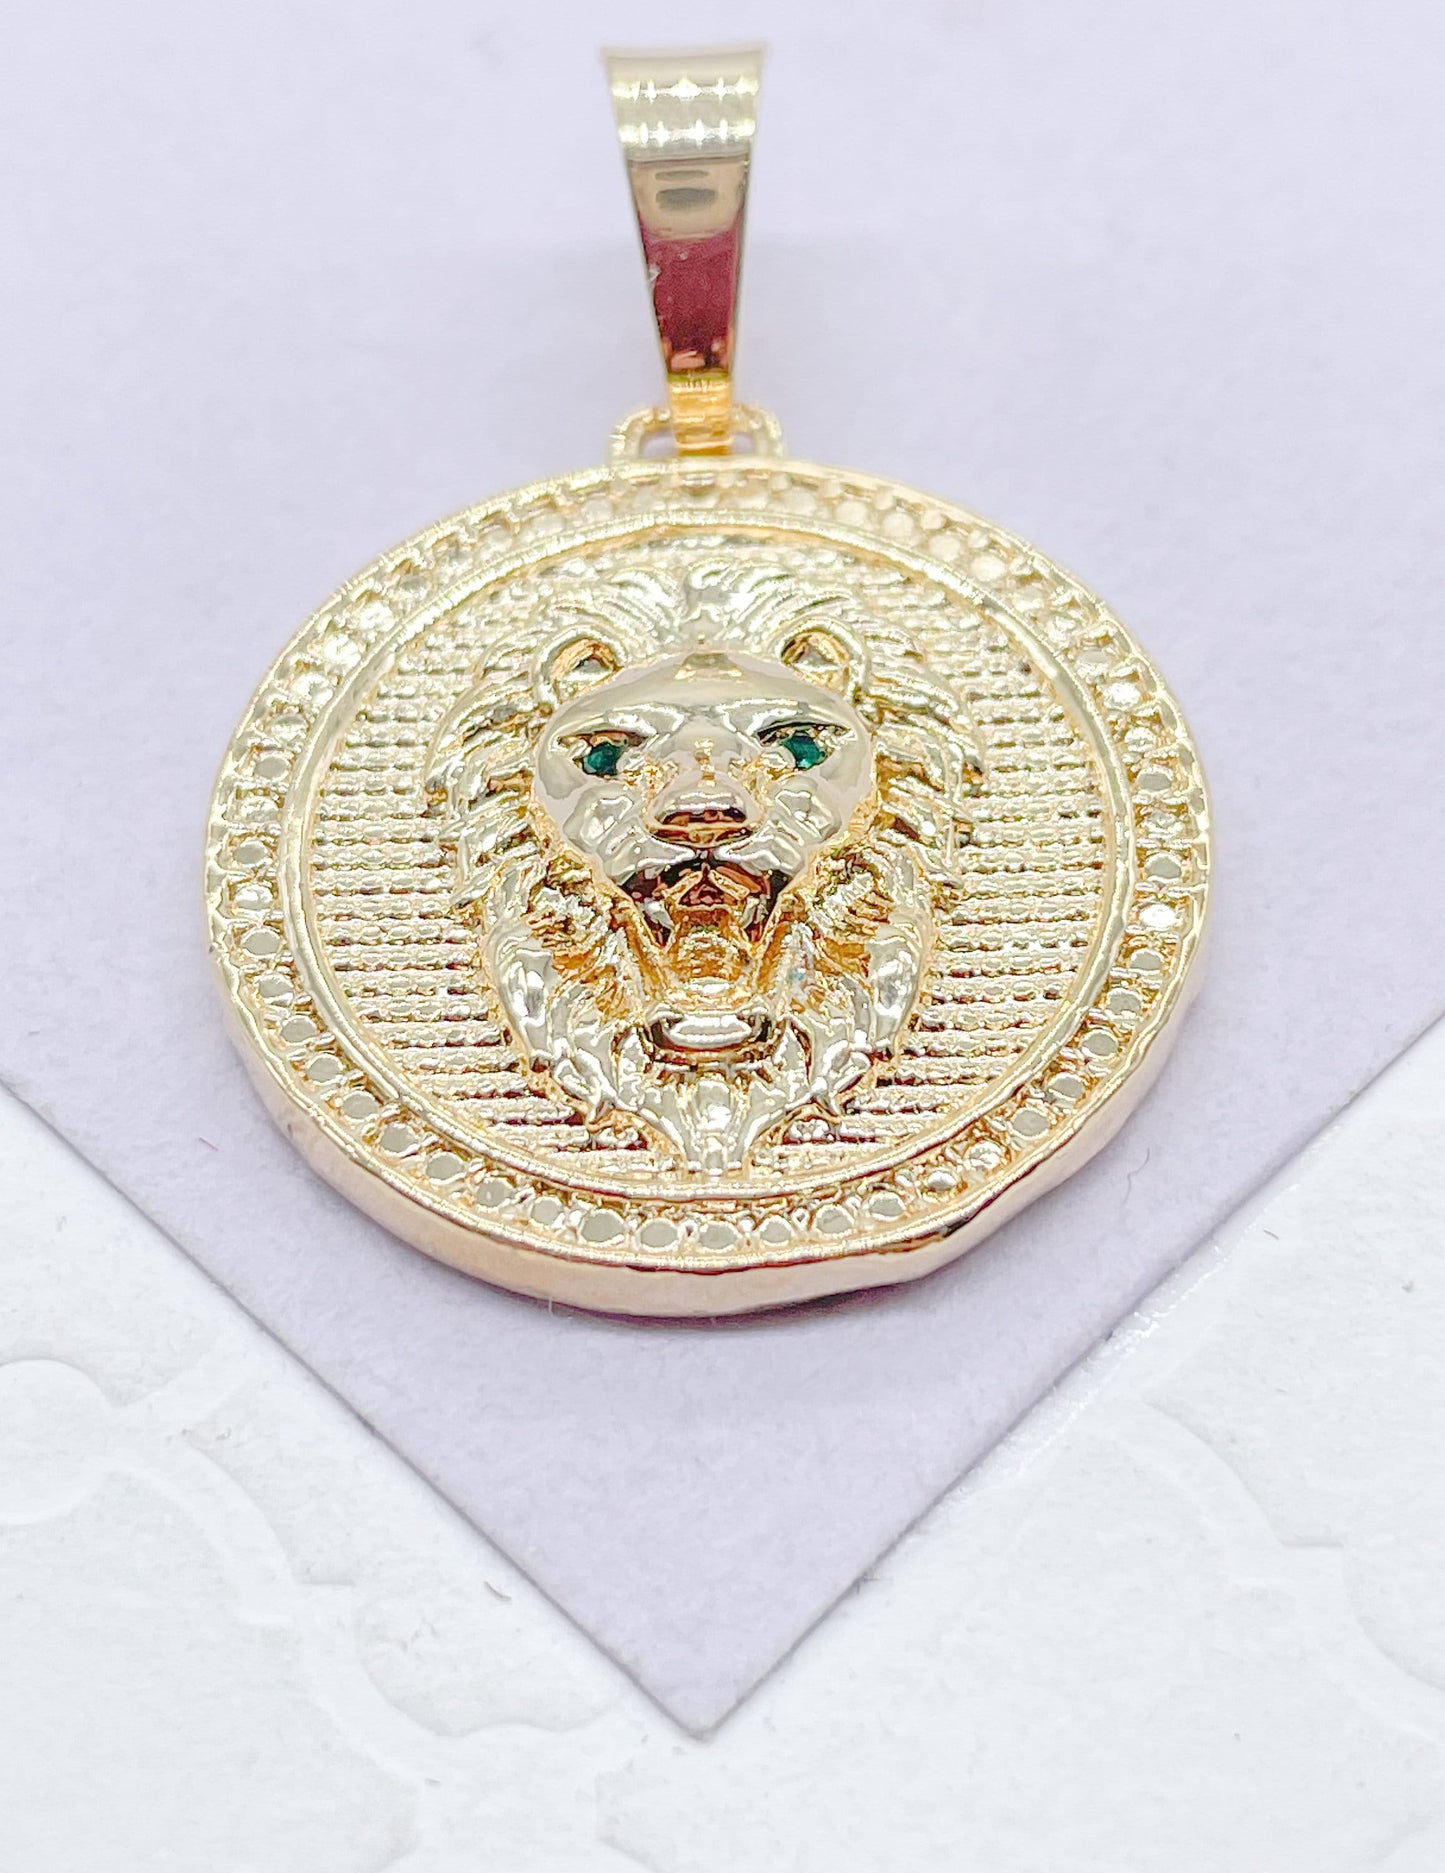 18k Gold Filled Lion Head Medallion Pendant With With Engraved Patters And Emerald Green Eye Stones